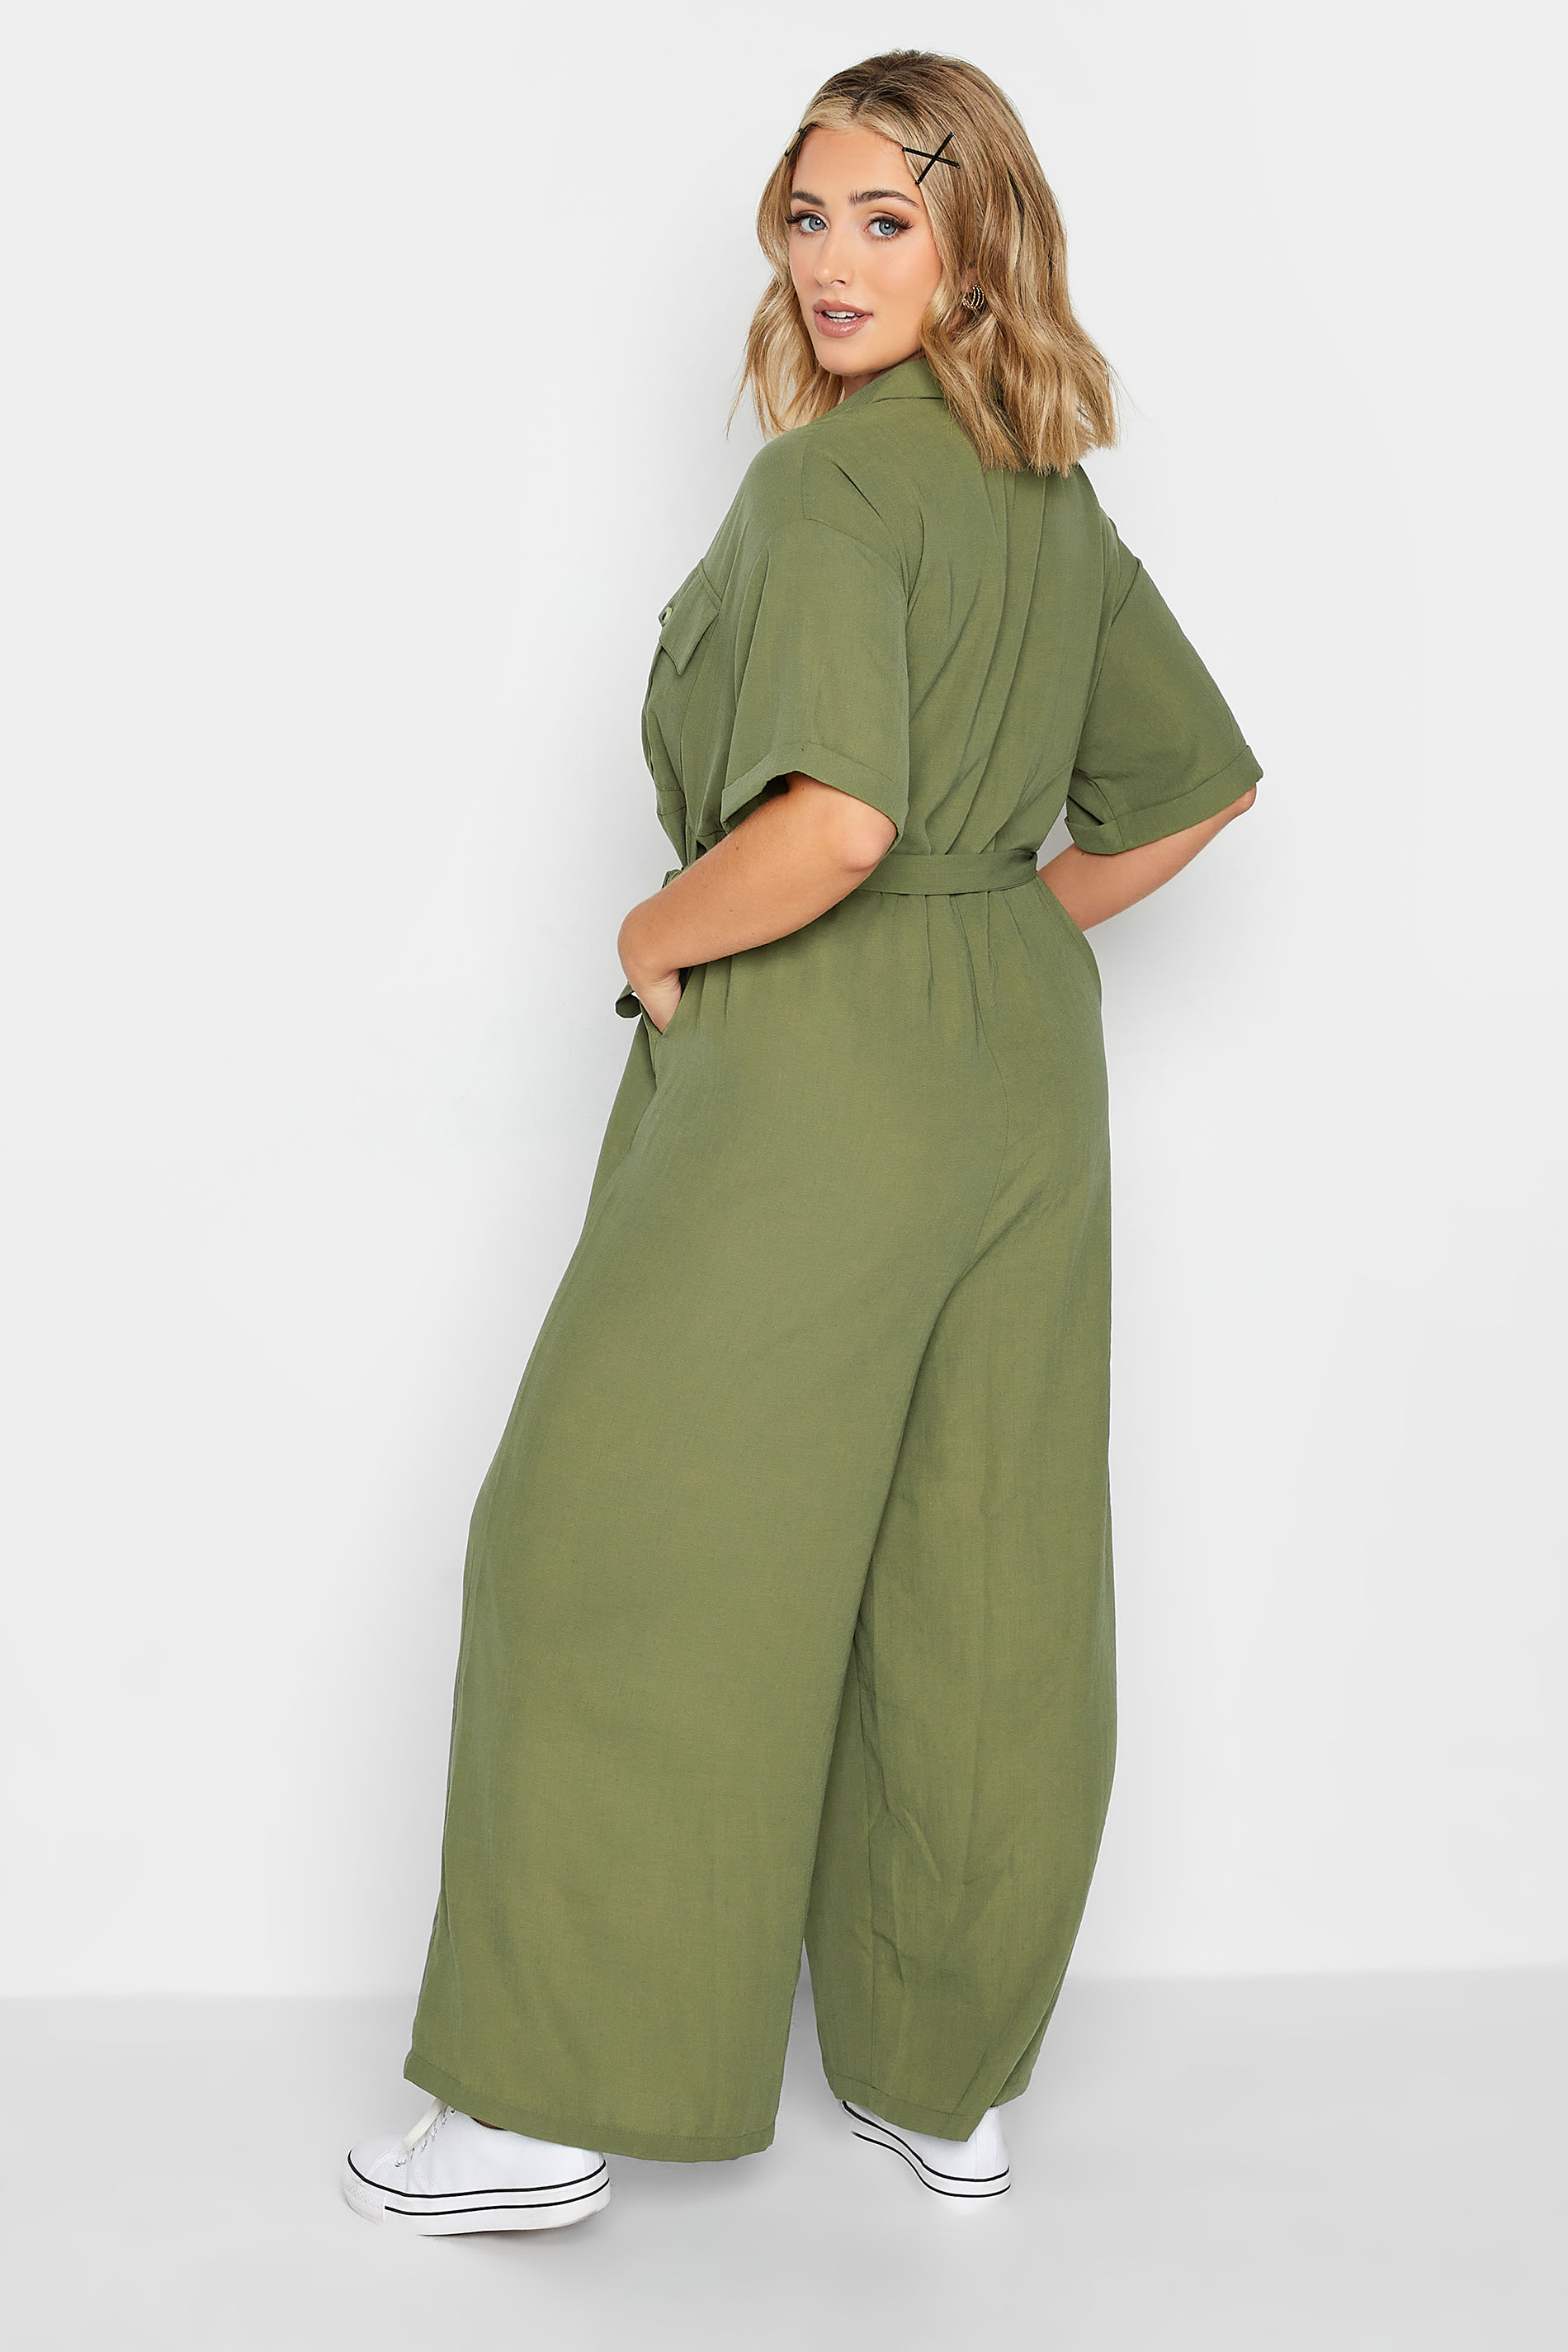 LIMITED COLLECTION Plus Size Khaki Green Jumpsuit | Yours Clothing 3